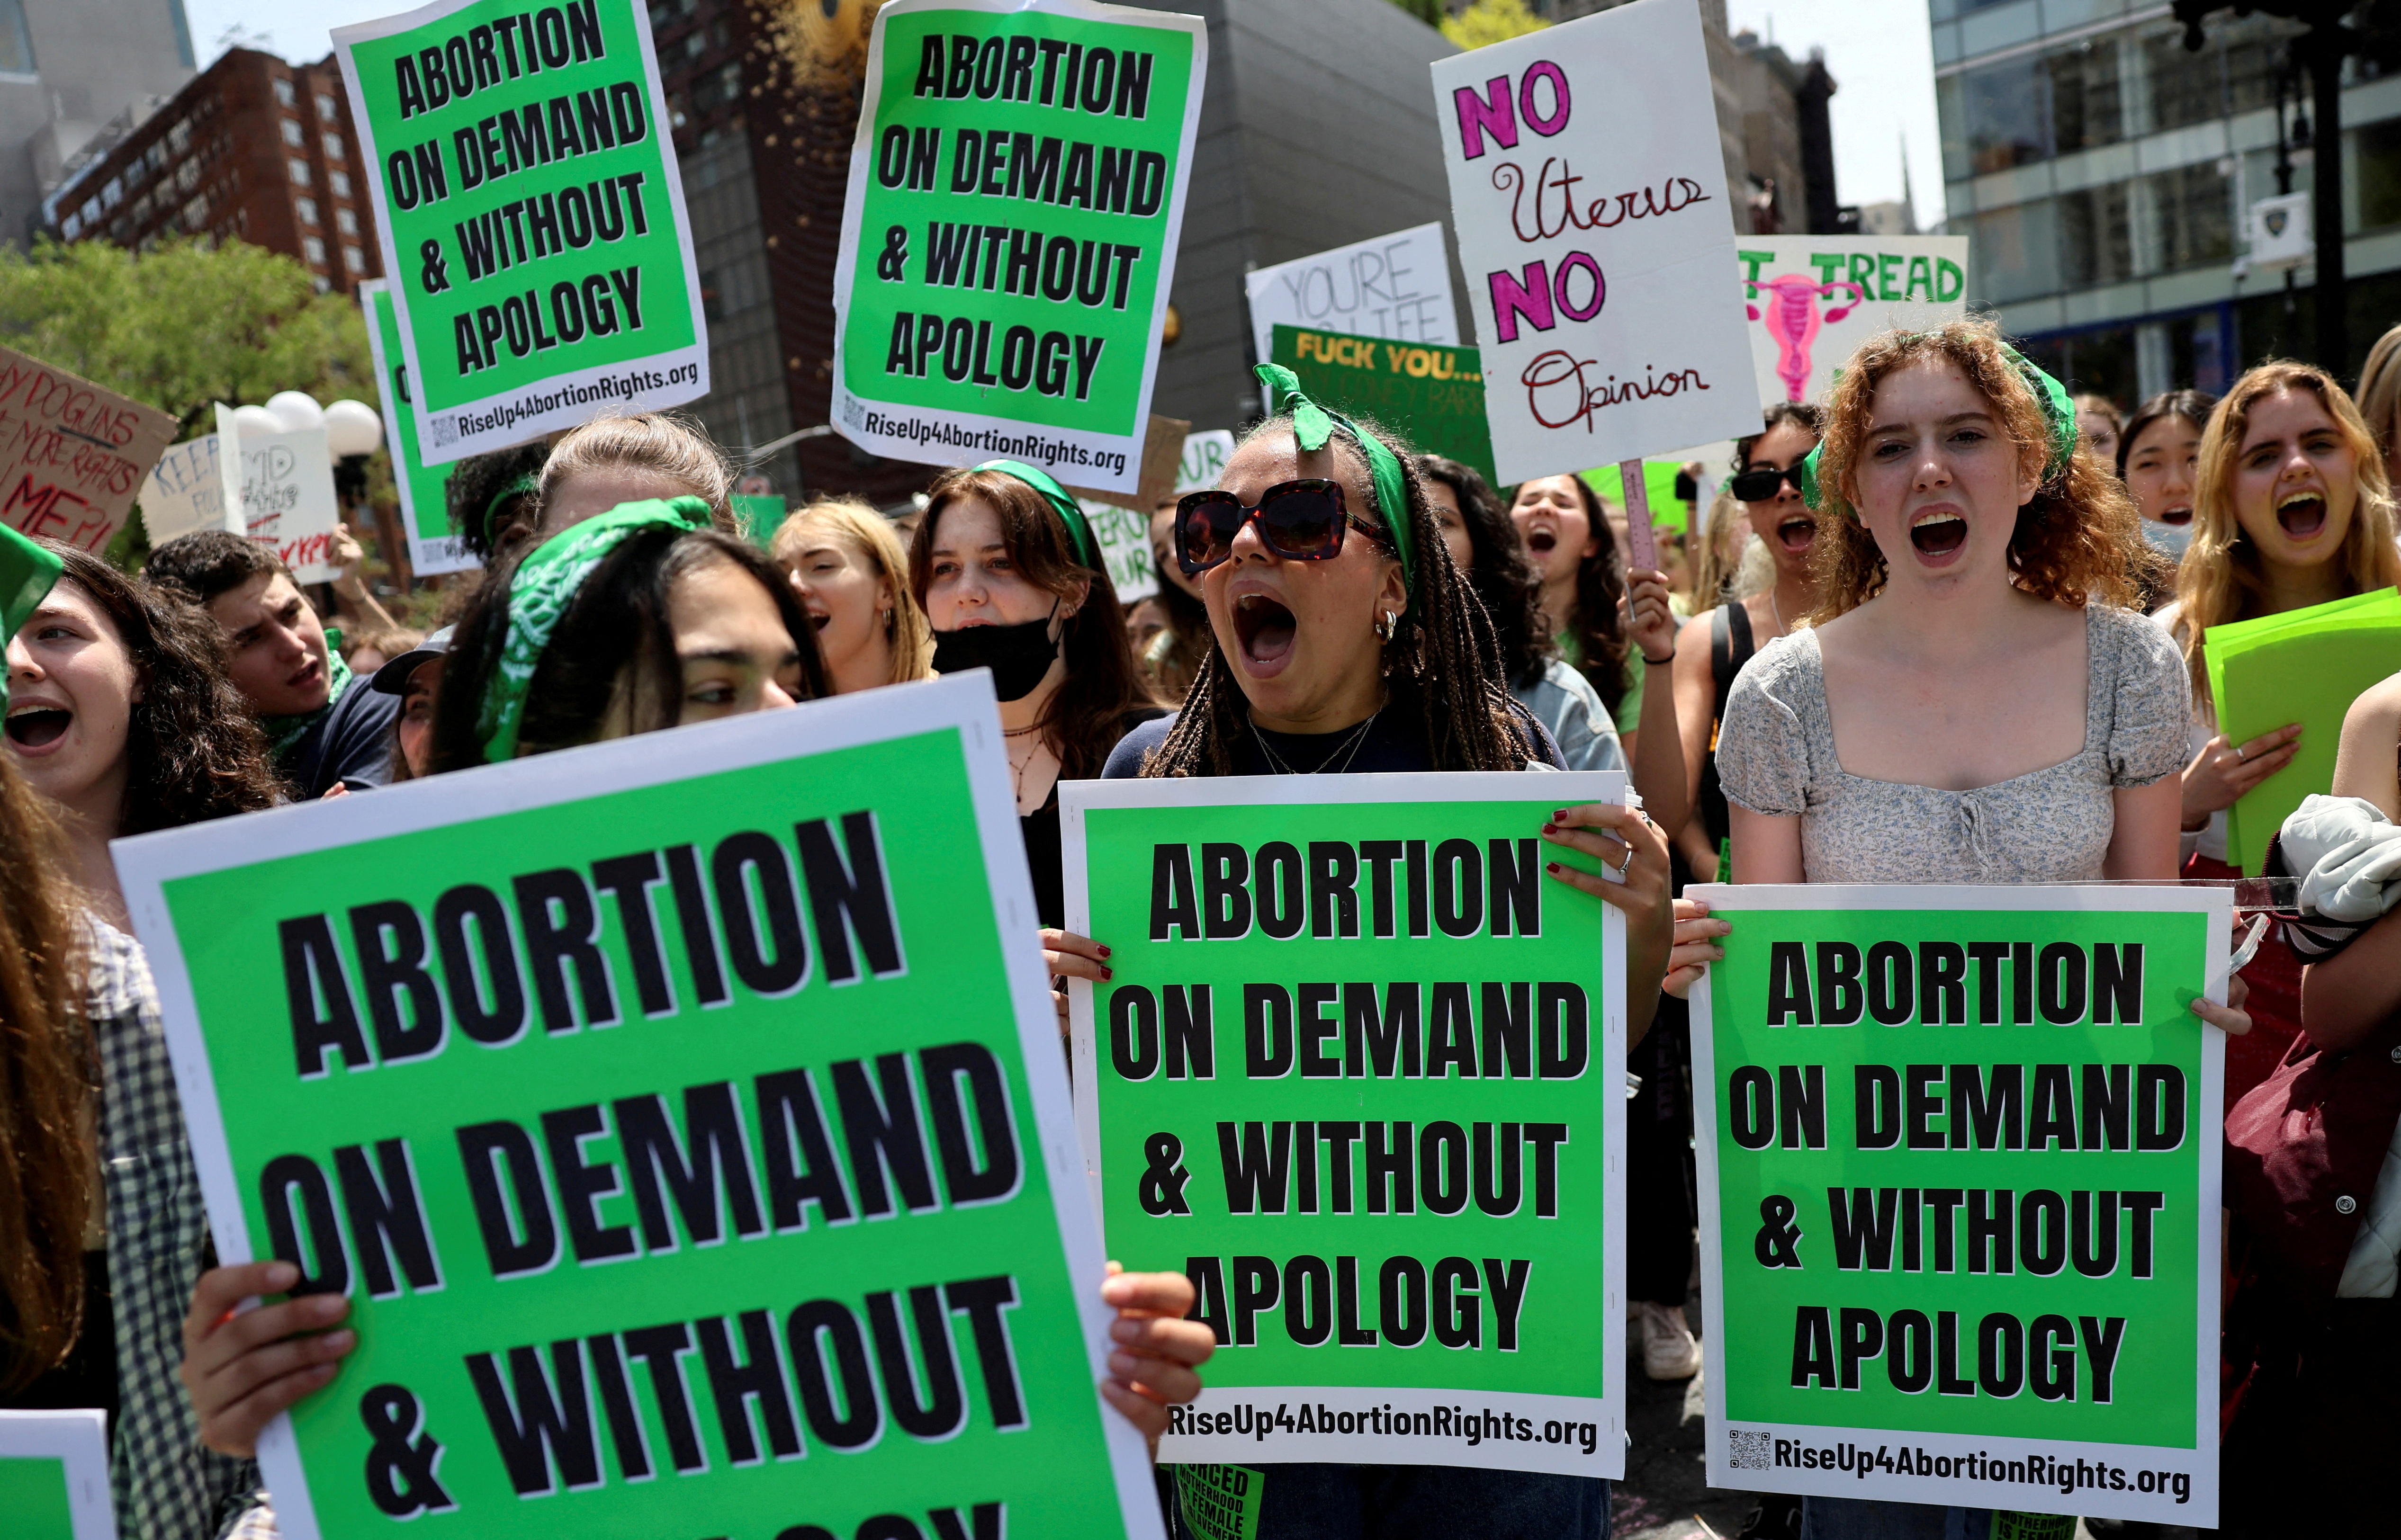 Students and others protest for abortion rights in New York City